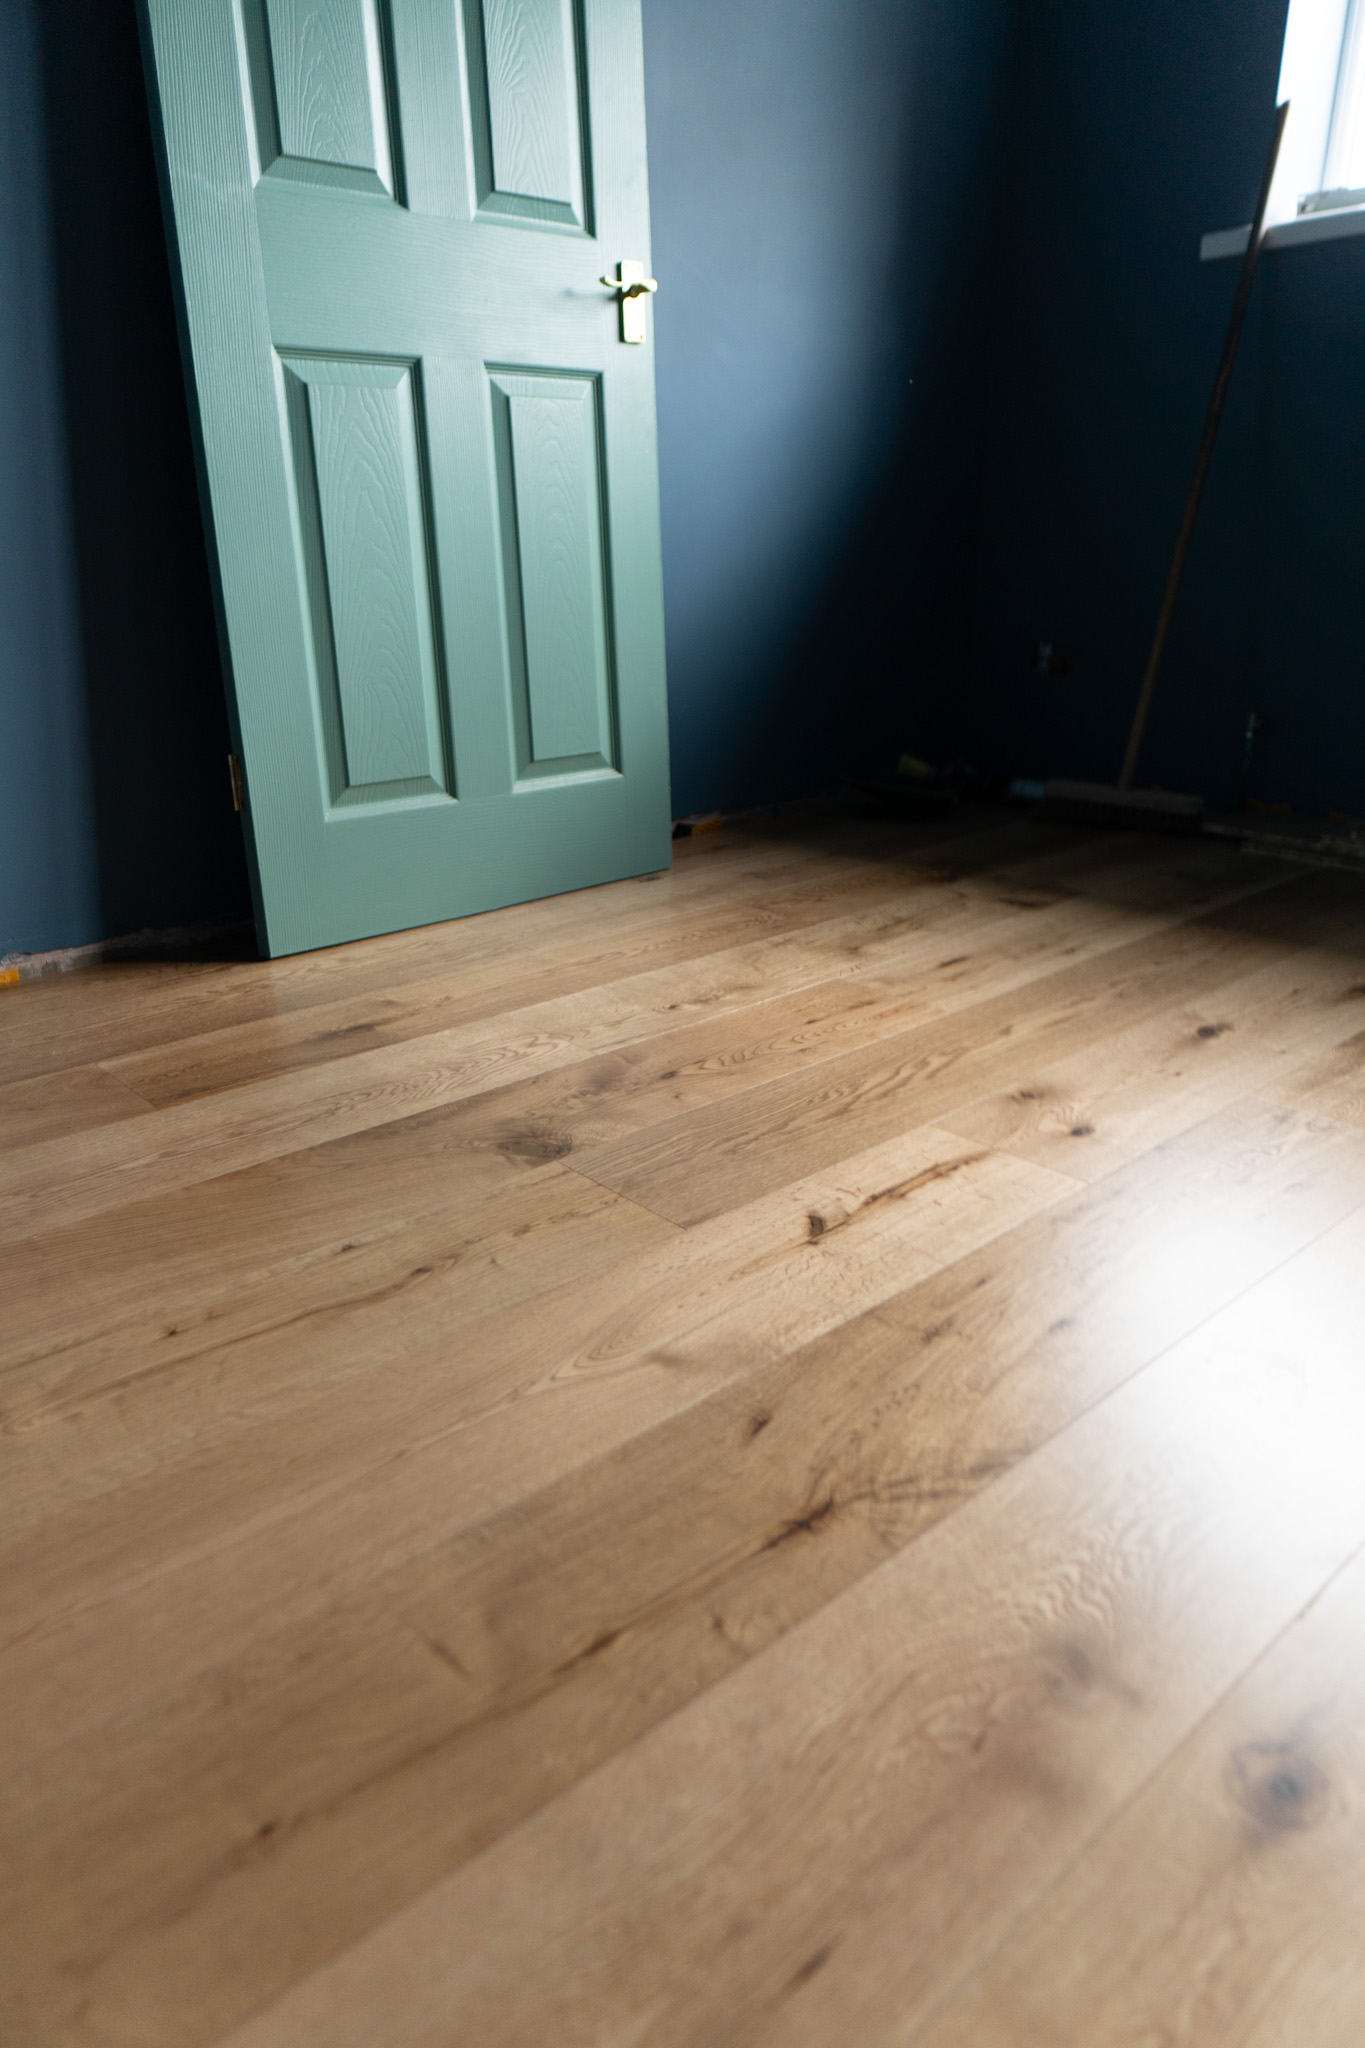 What is One Problem Associated with Engineered Floor Systems?